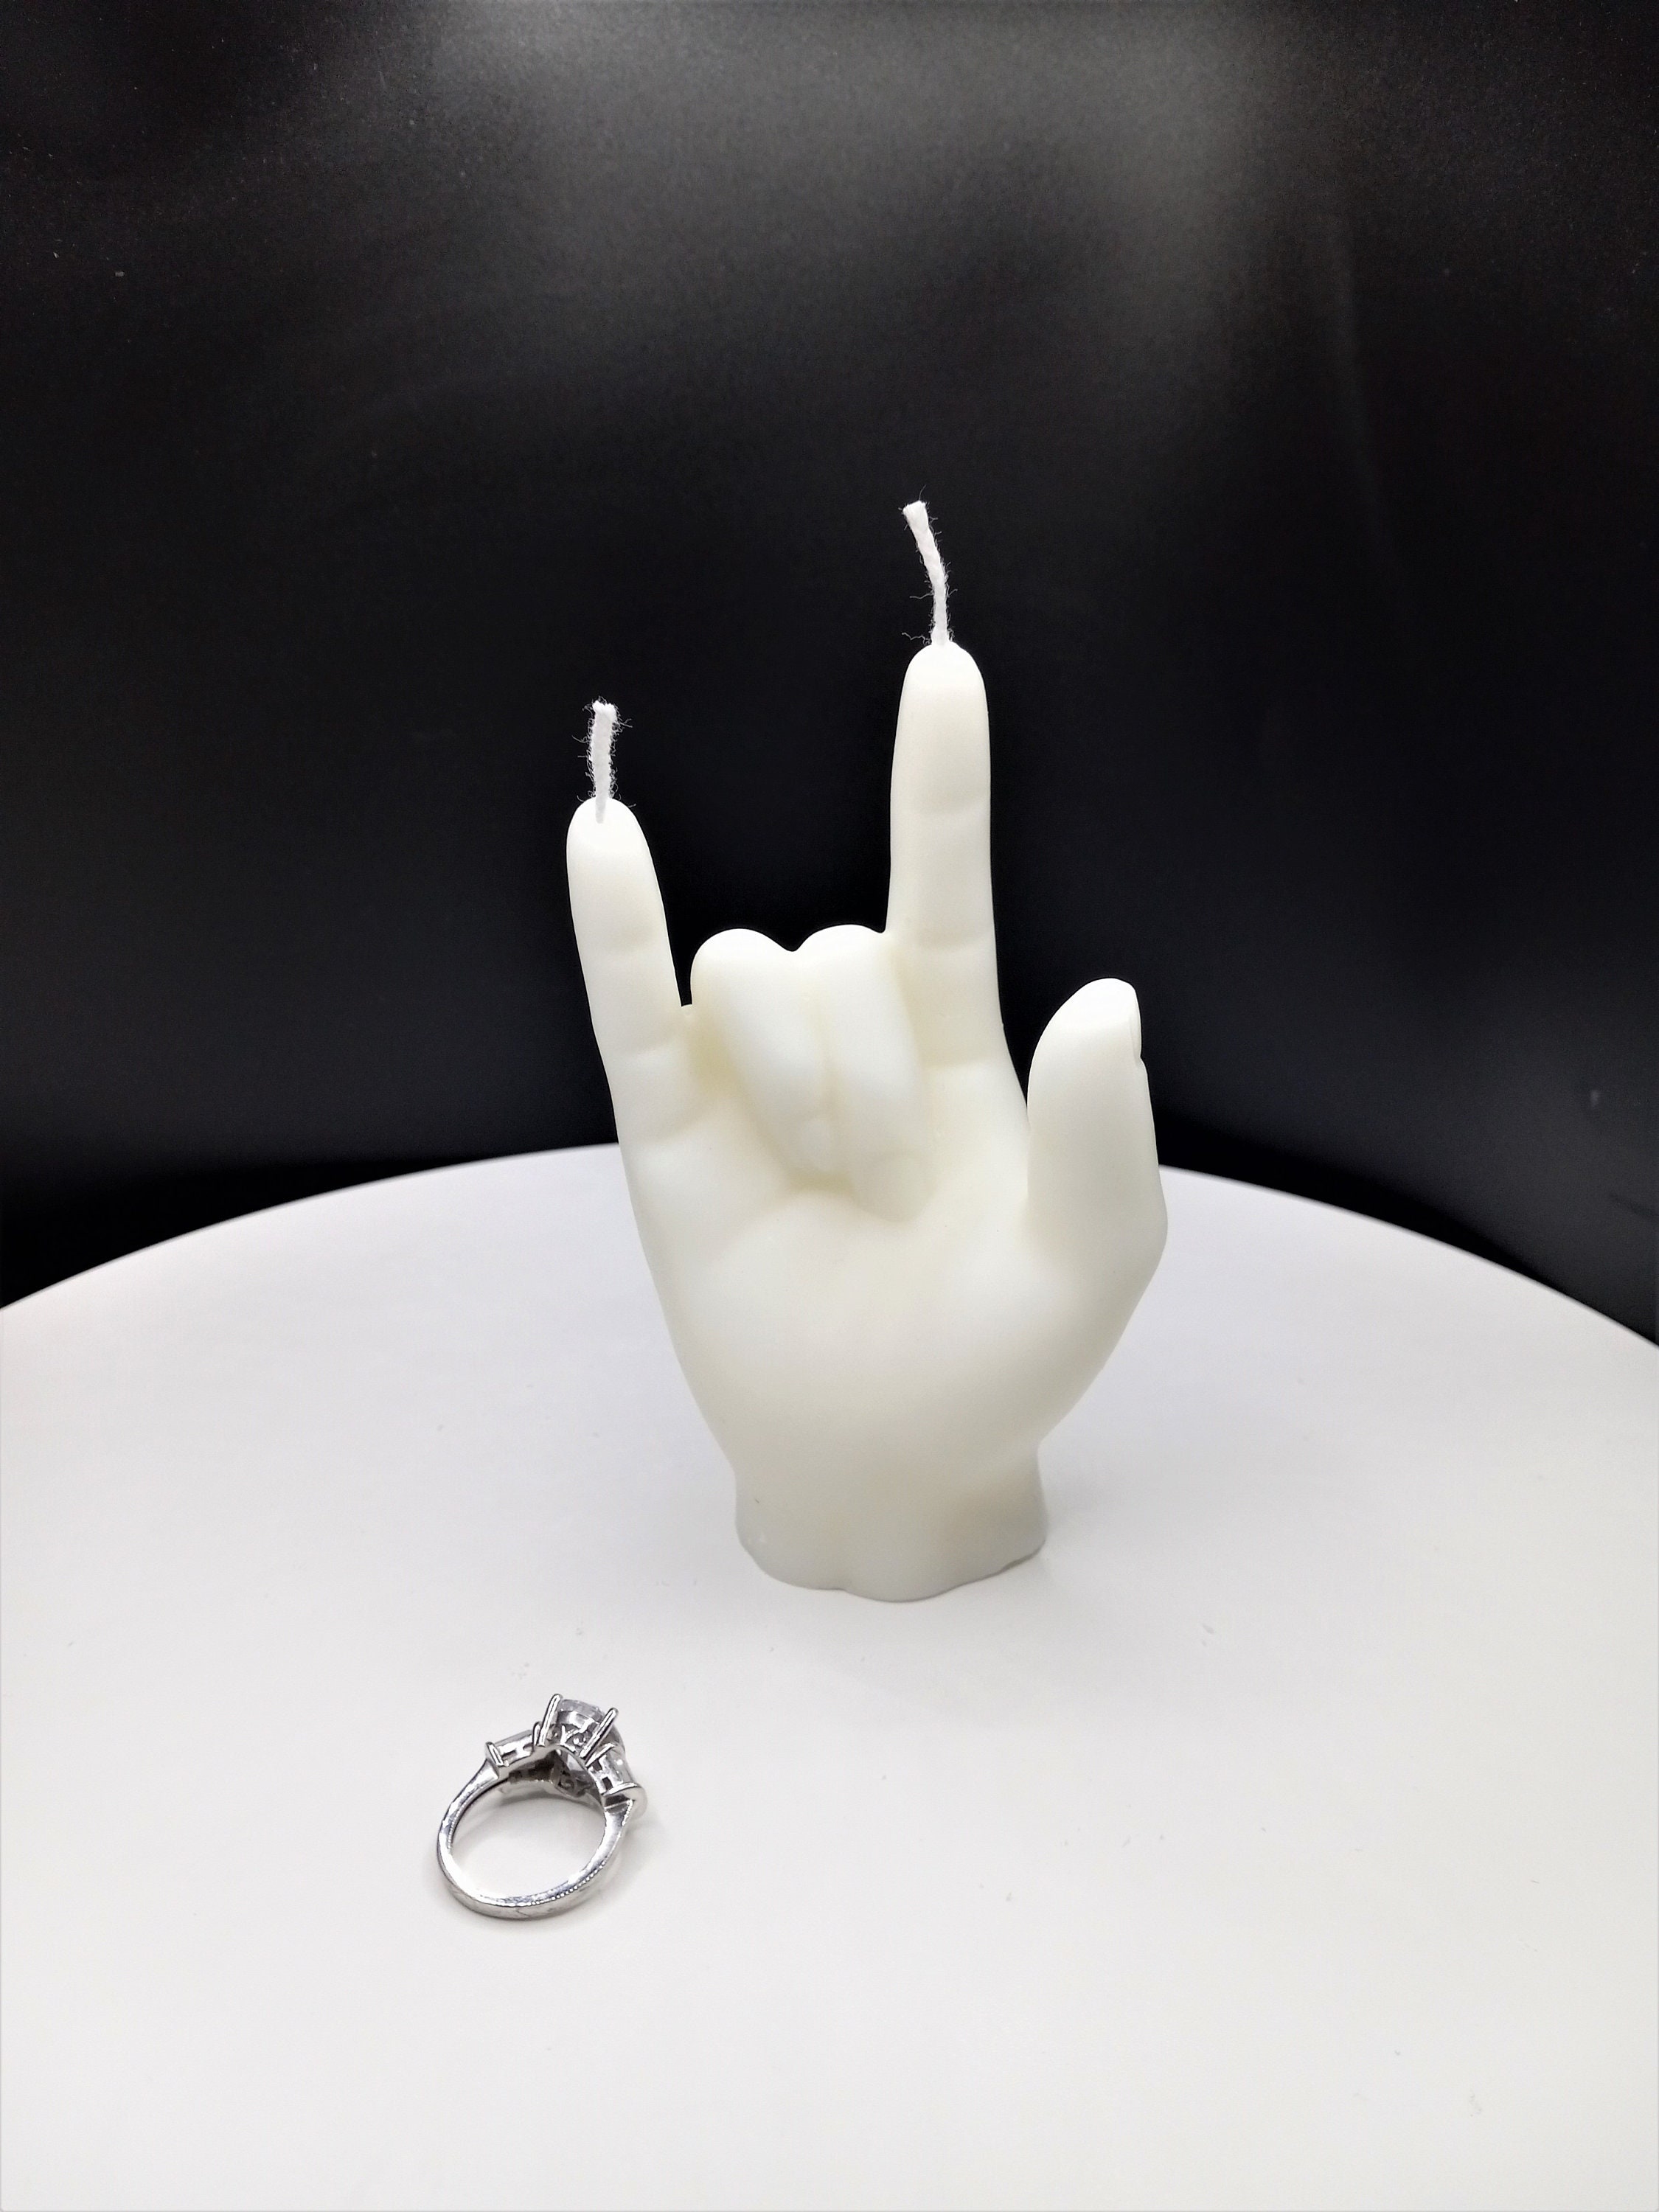 Love Hand Symbol Candle-3d Hand Candle-hand Gesture Candle-realistic Hand  Candle Sign Language Candle Cake Topper Fondant Candle Home Decor 